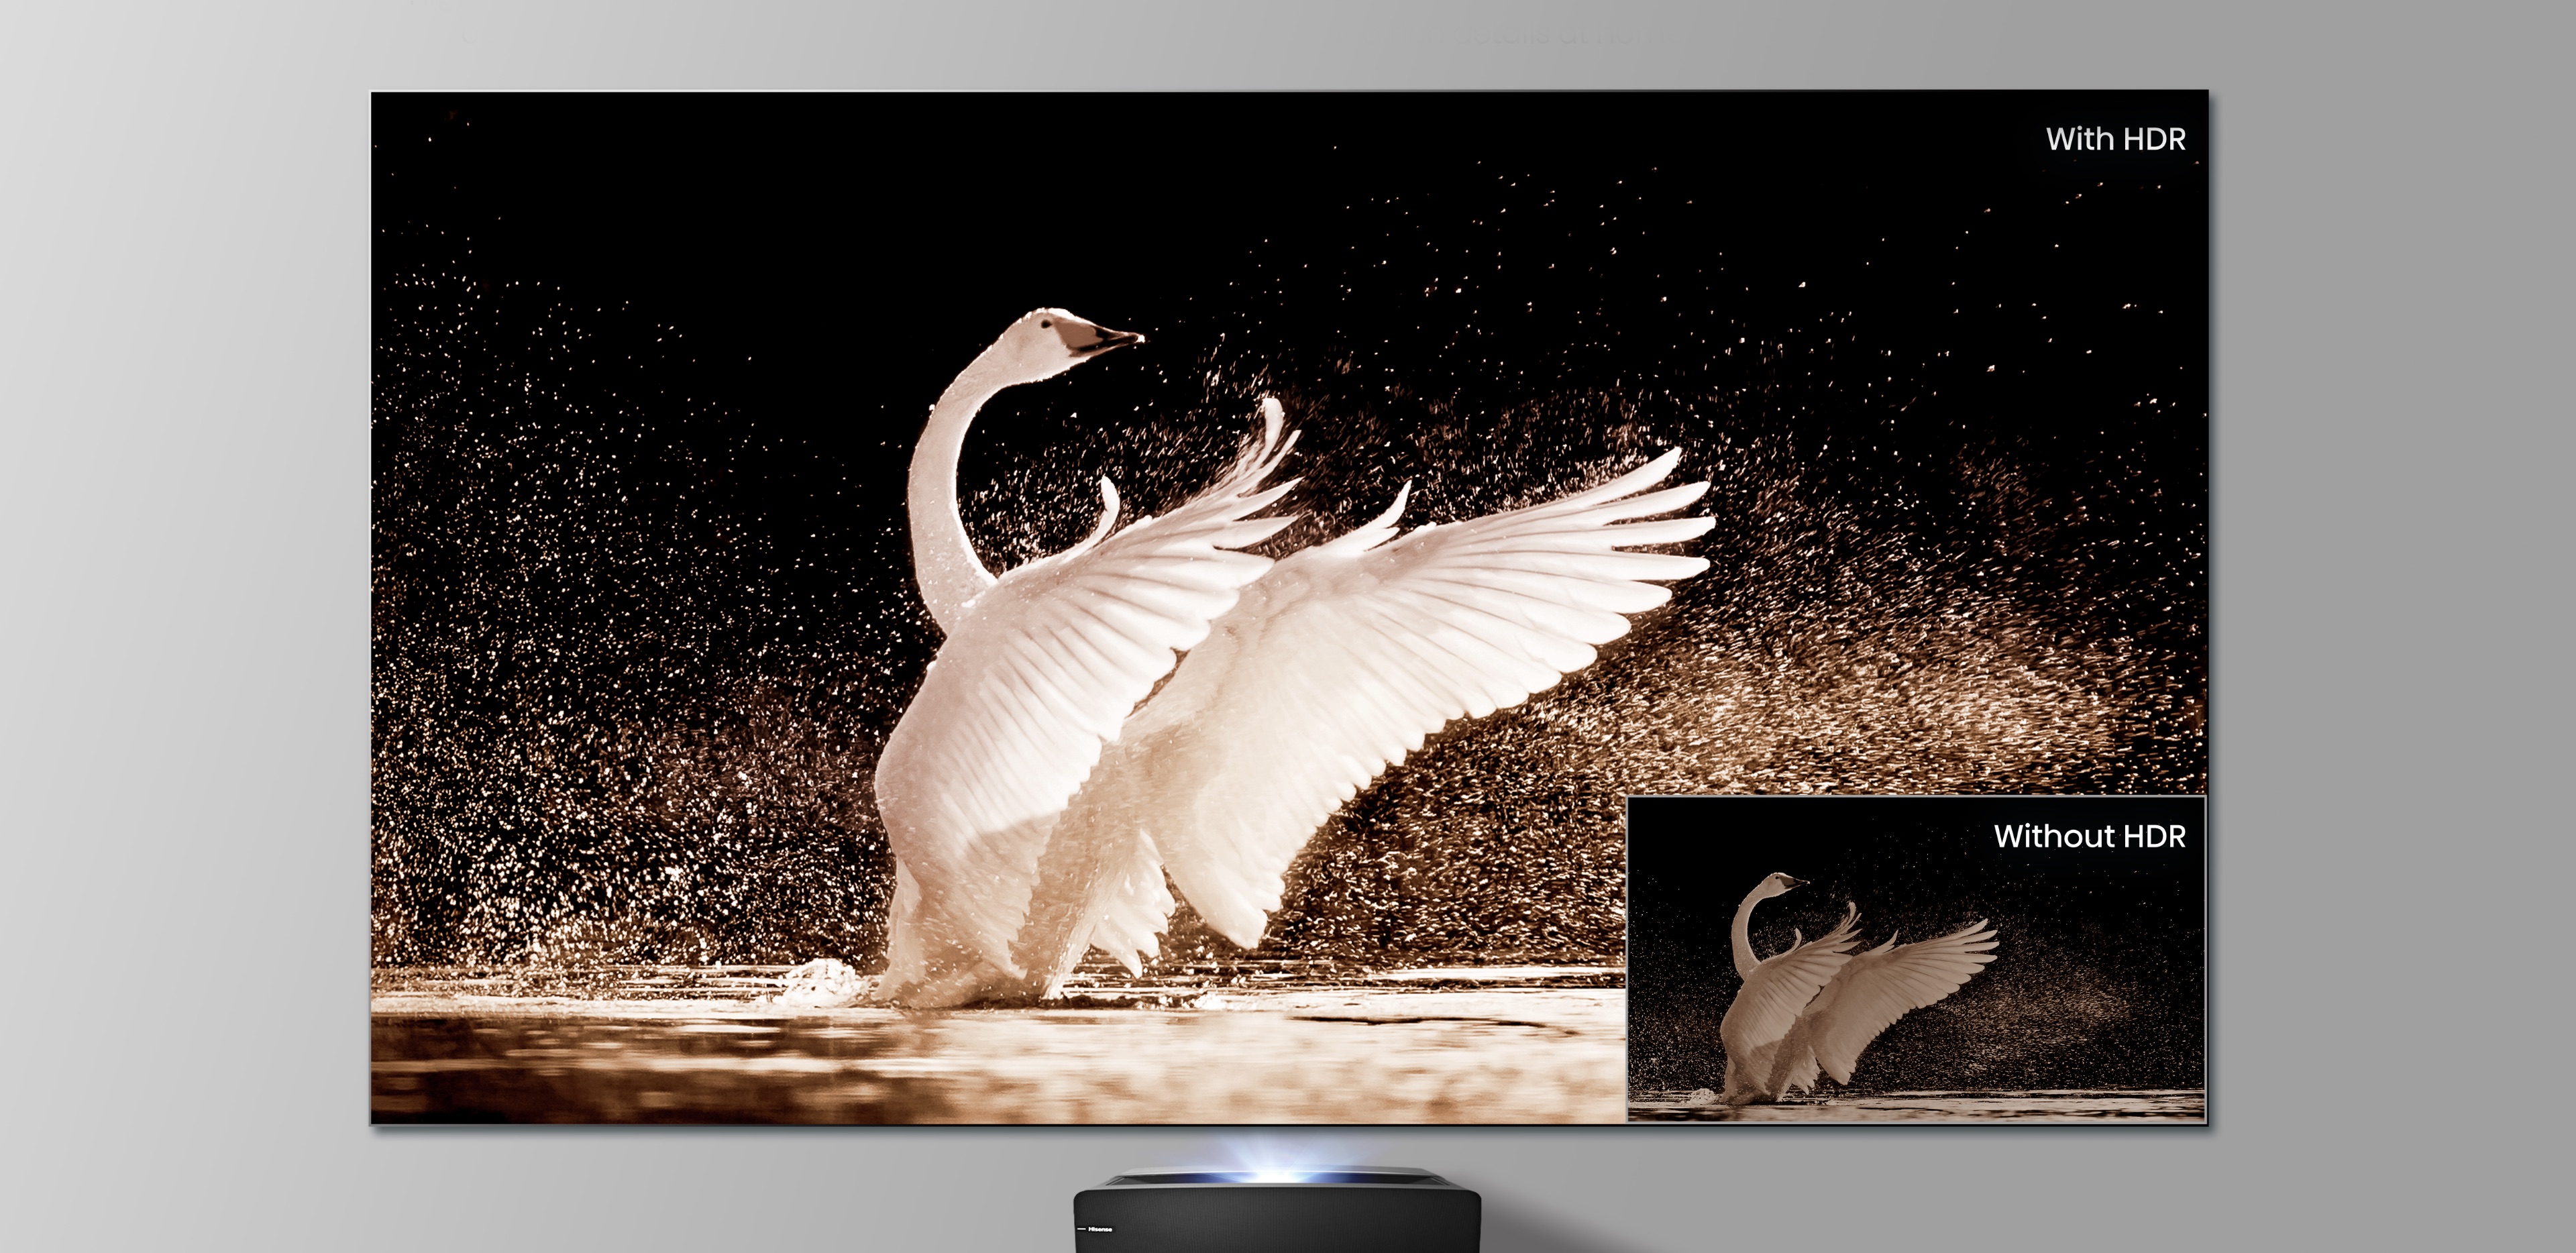 Hisense 120L5 - Experience Incredible Contrast